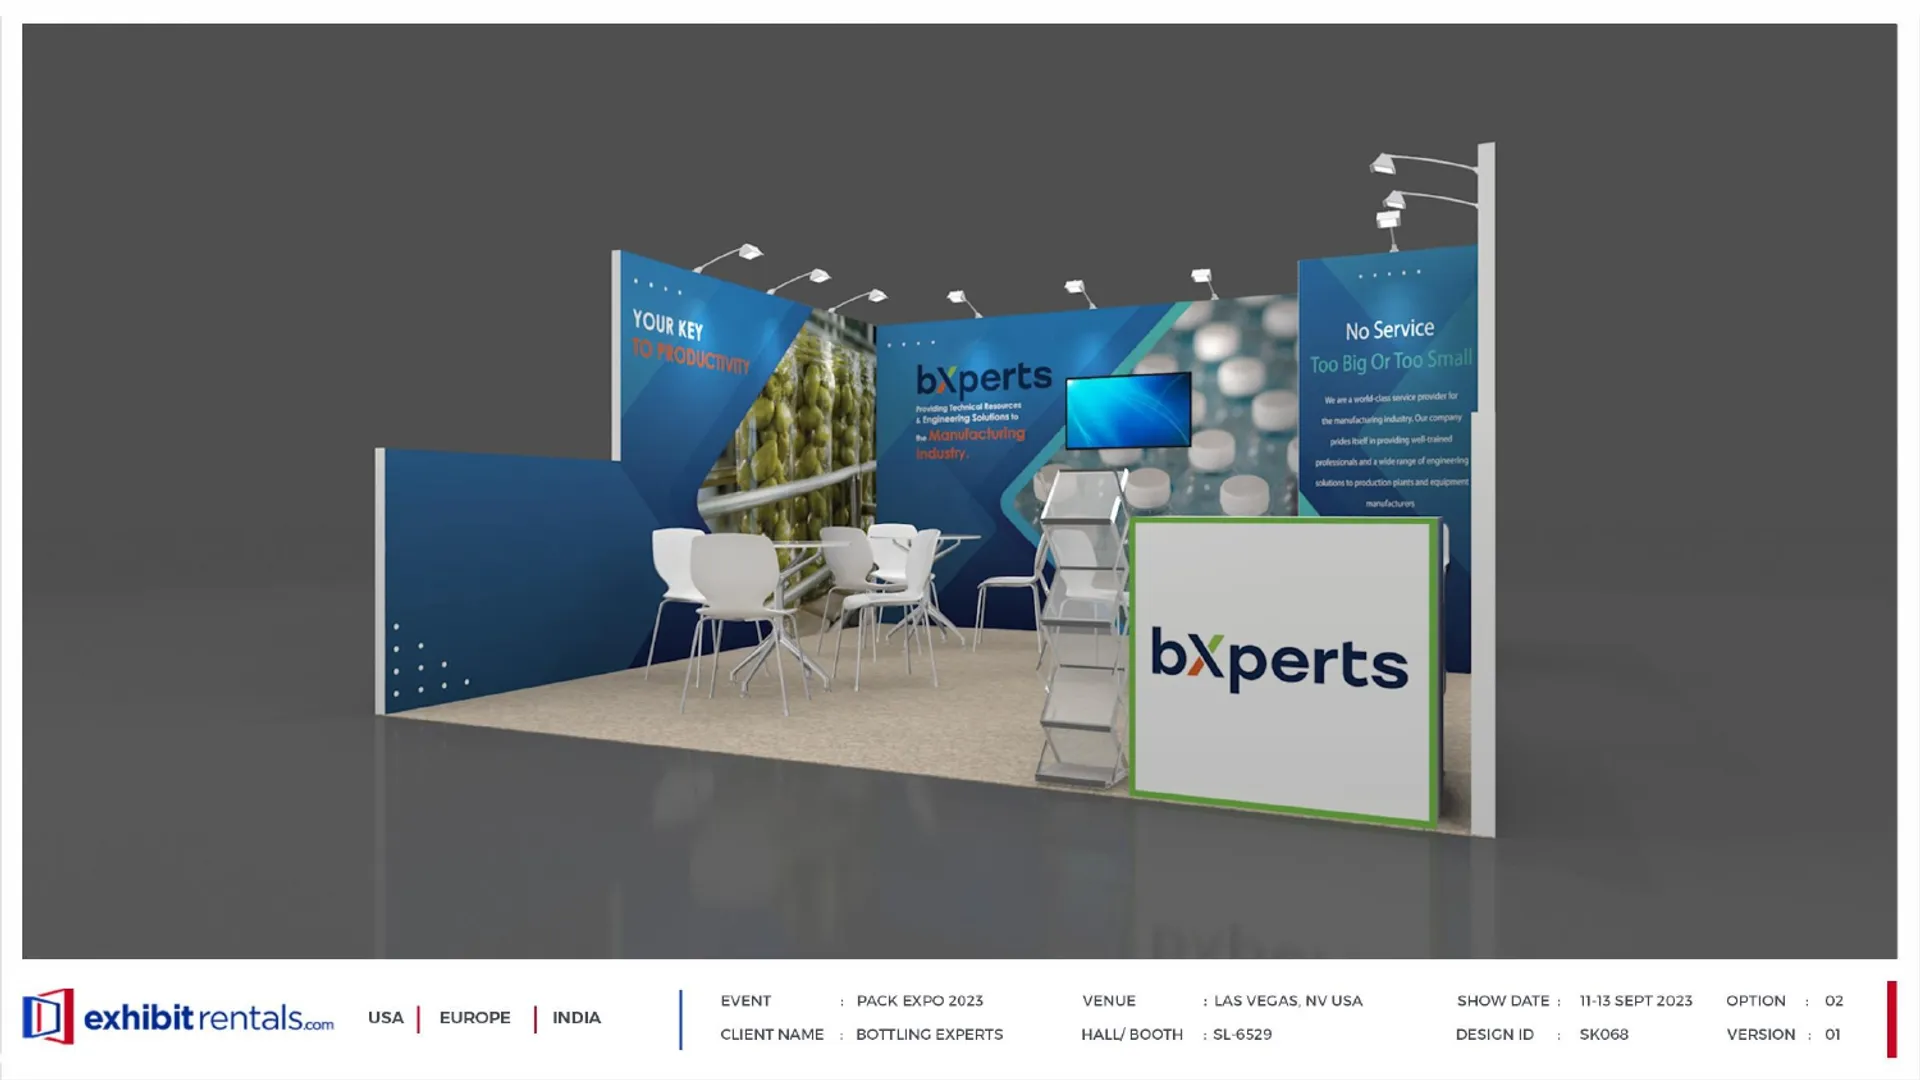 booth-design-projects/Exhibit-Rentals/2024-04-18-15x15-INLINE-Project-92/2.1 - Bottling Experts - ER Design Presentation.pptx-11_page-0001-6whhwe.jpg